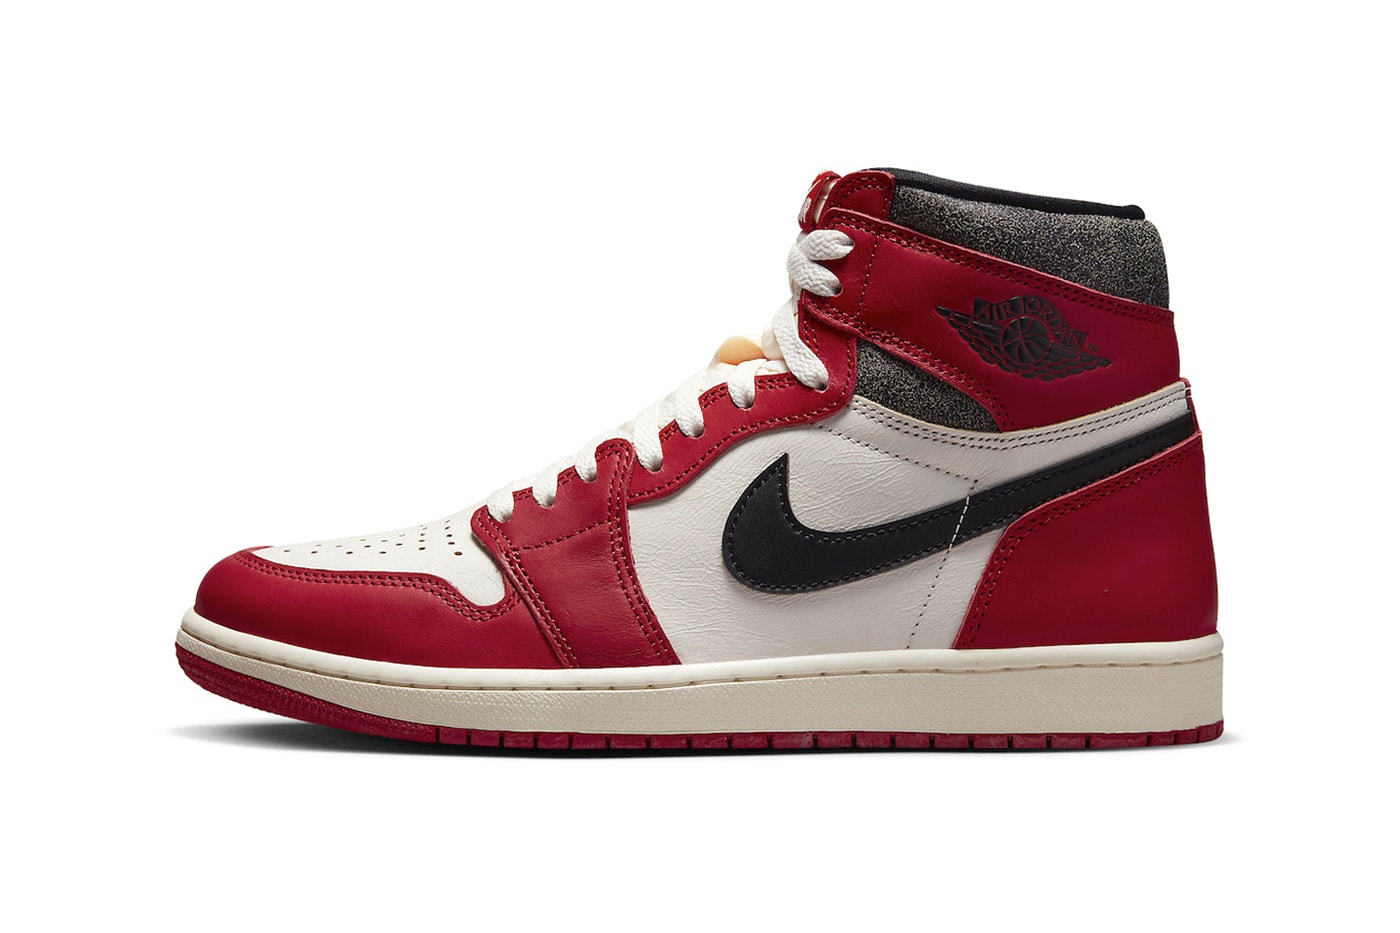 Air Jordan 1 High OG Lost & Found Official Look Release Info DZ5485-612 Date Buy Price エアジョーダン1 “Lost & Found”の公式ビジュアルが解禁 